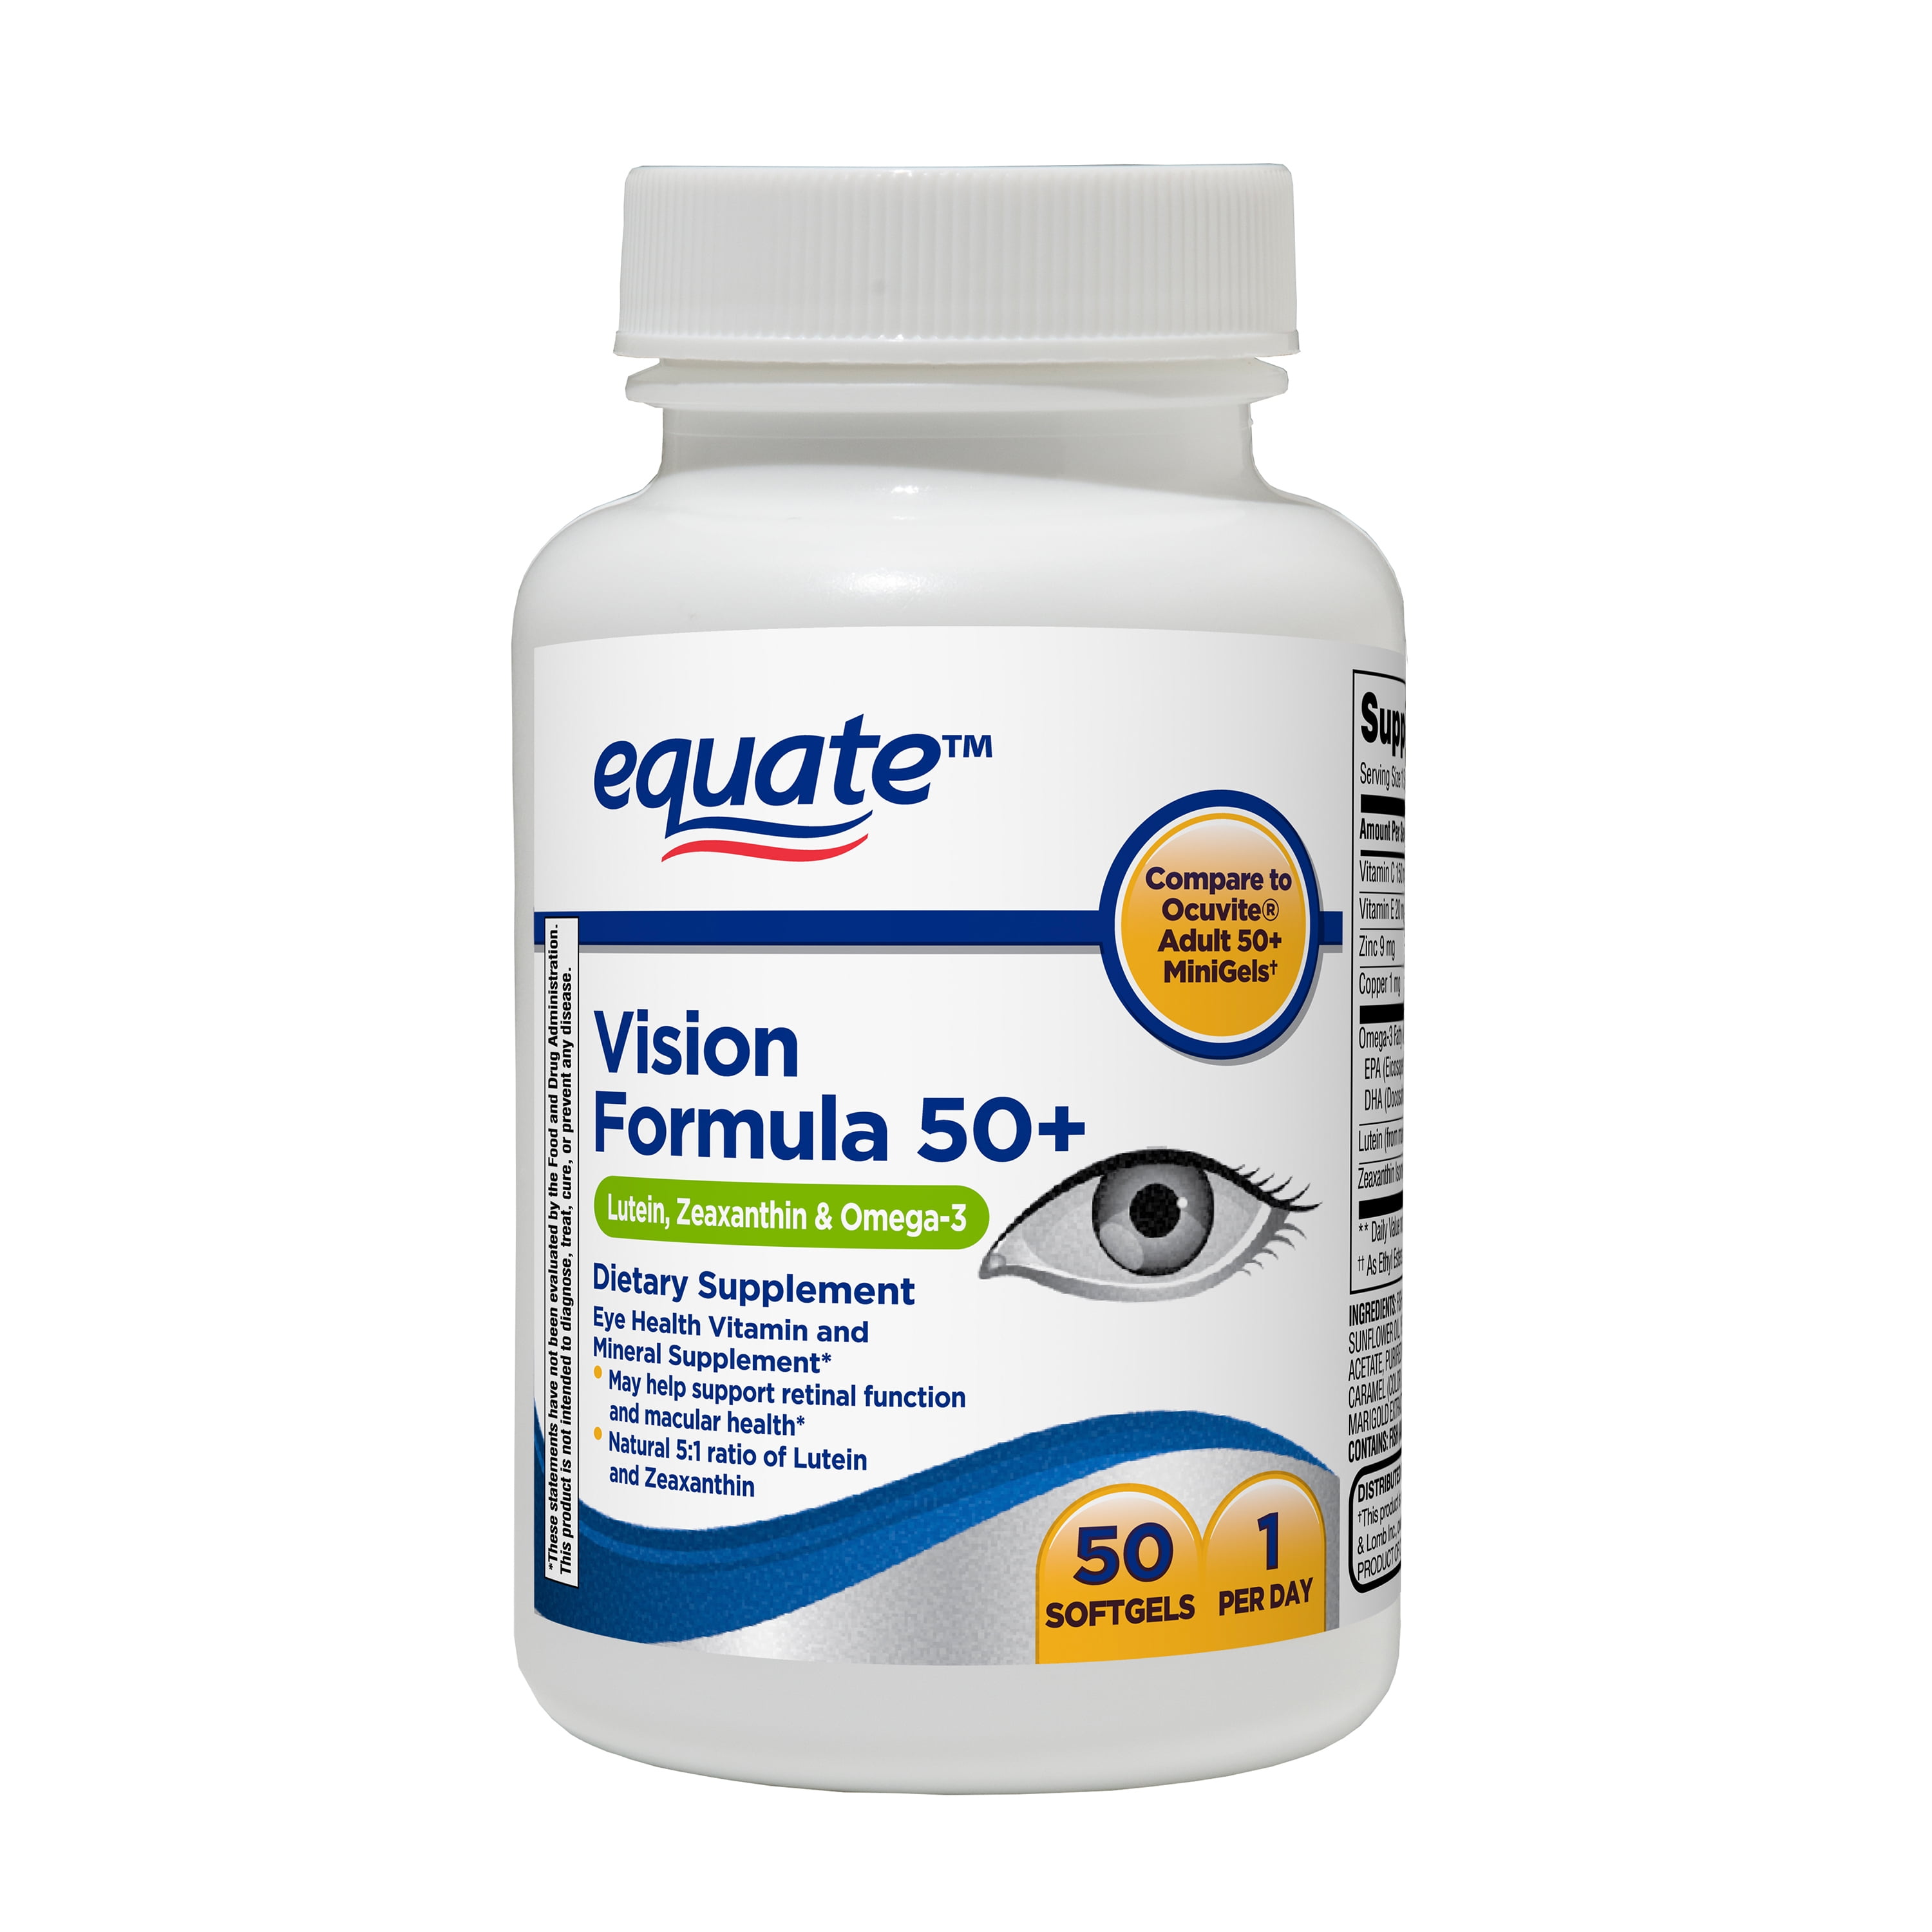 Equate Vision Formula 50+ Softgels Dietary Supplement, 50 Count